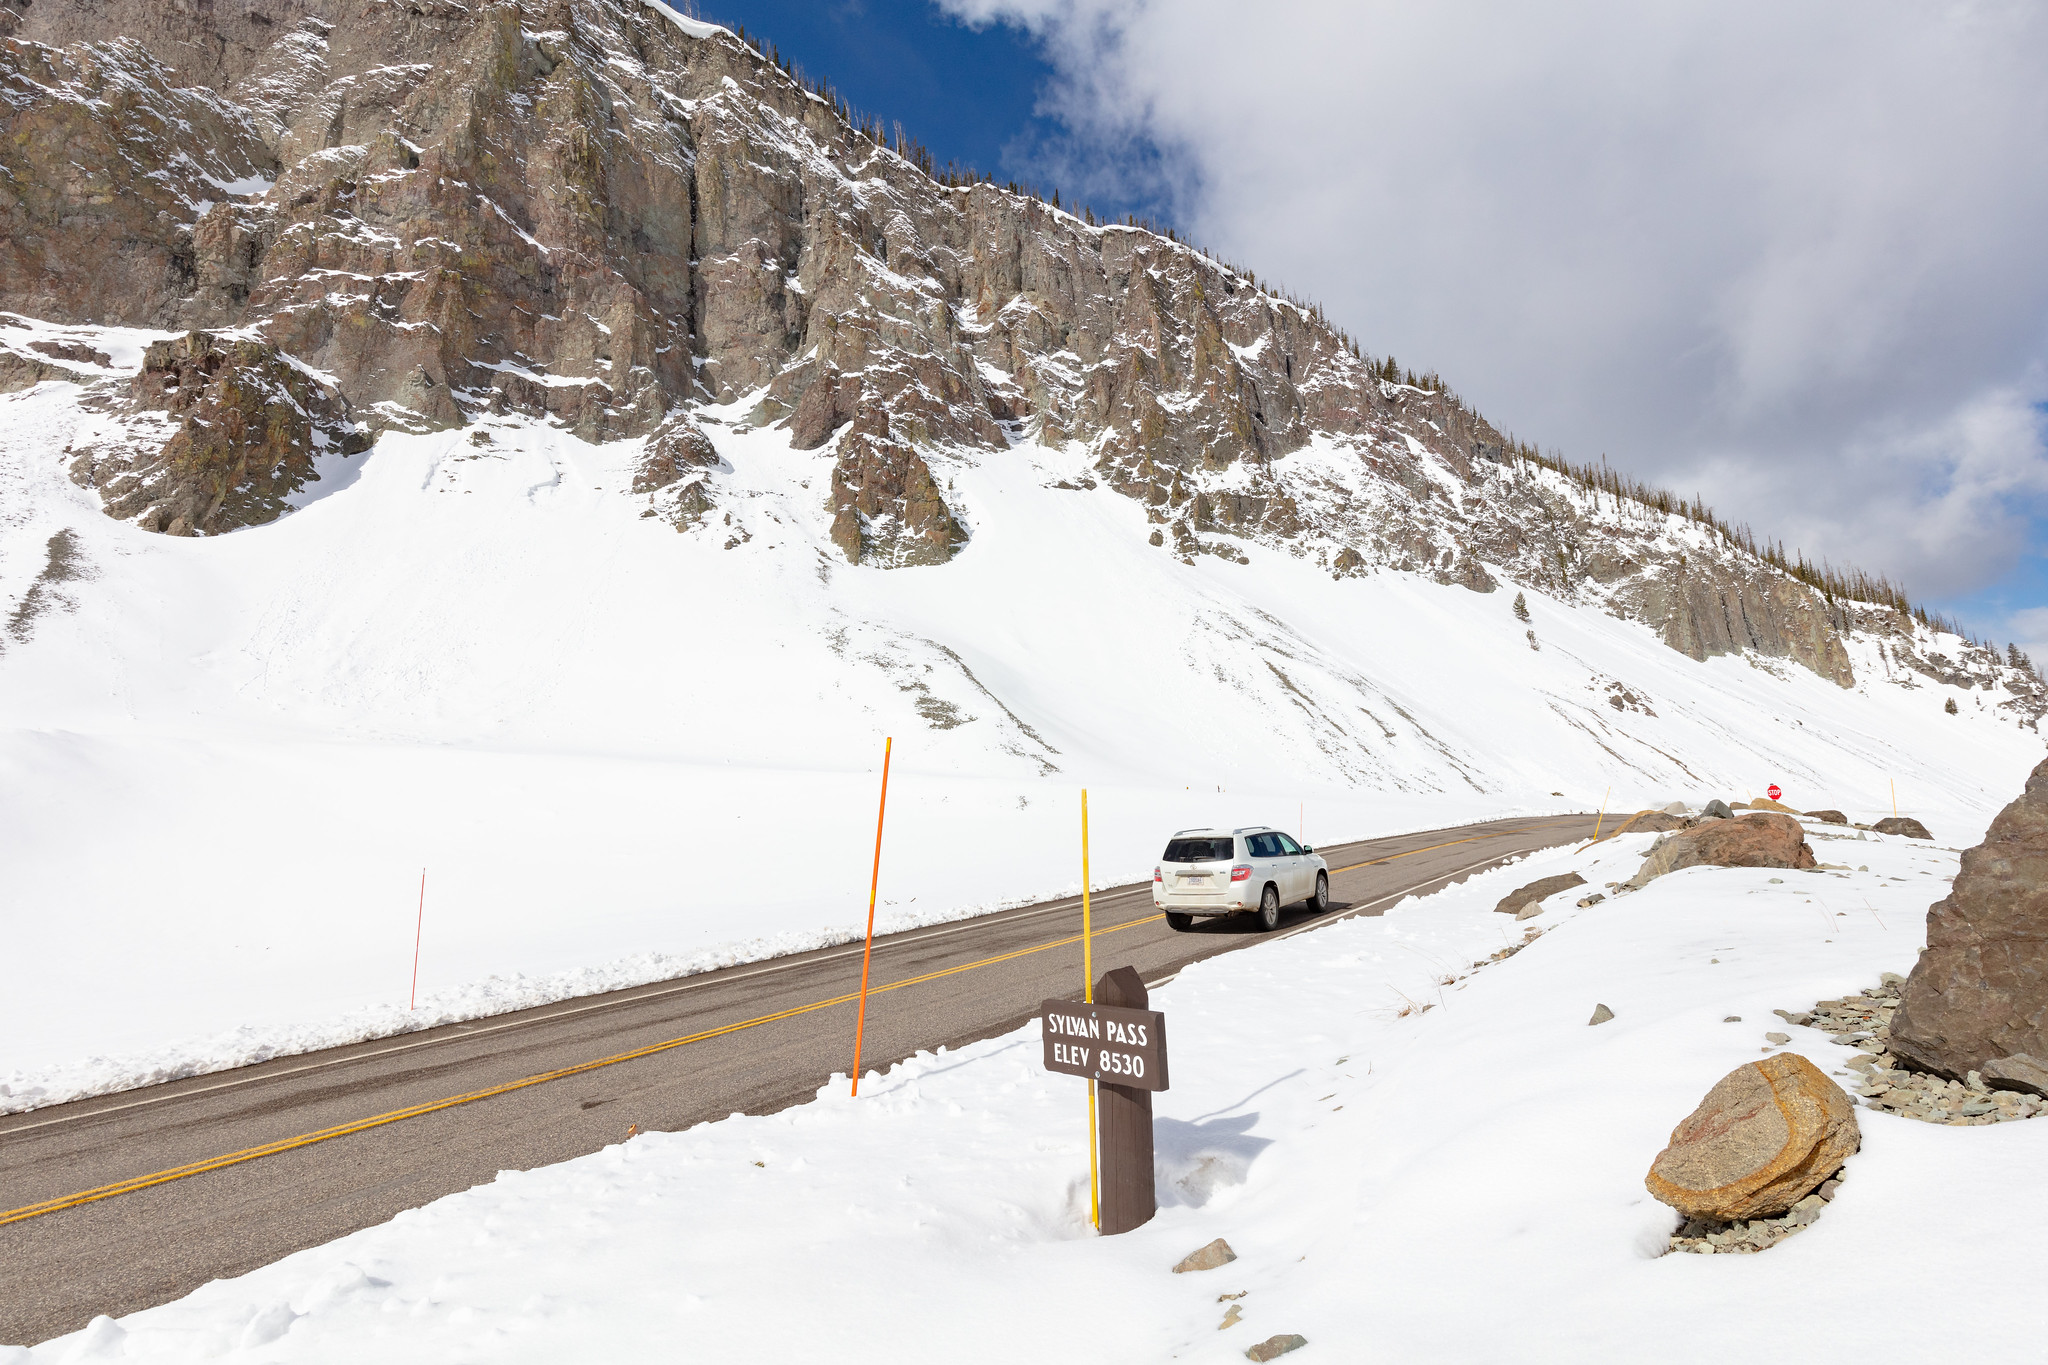 East Entrance Road conditions at Sylvan Pass